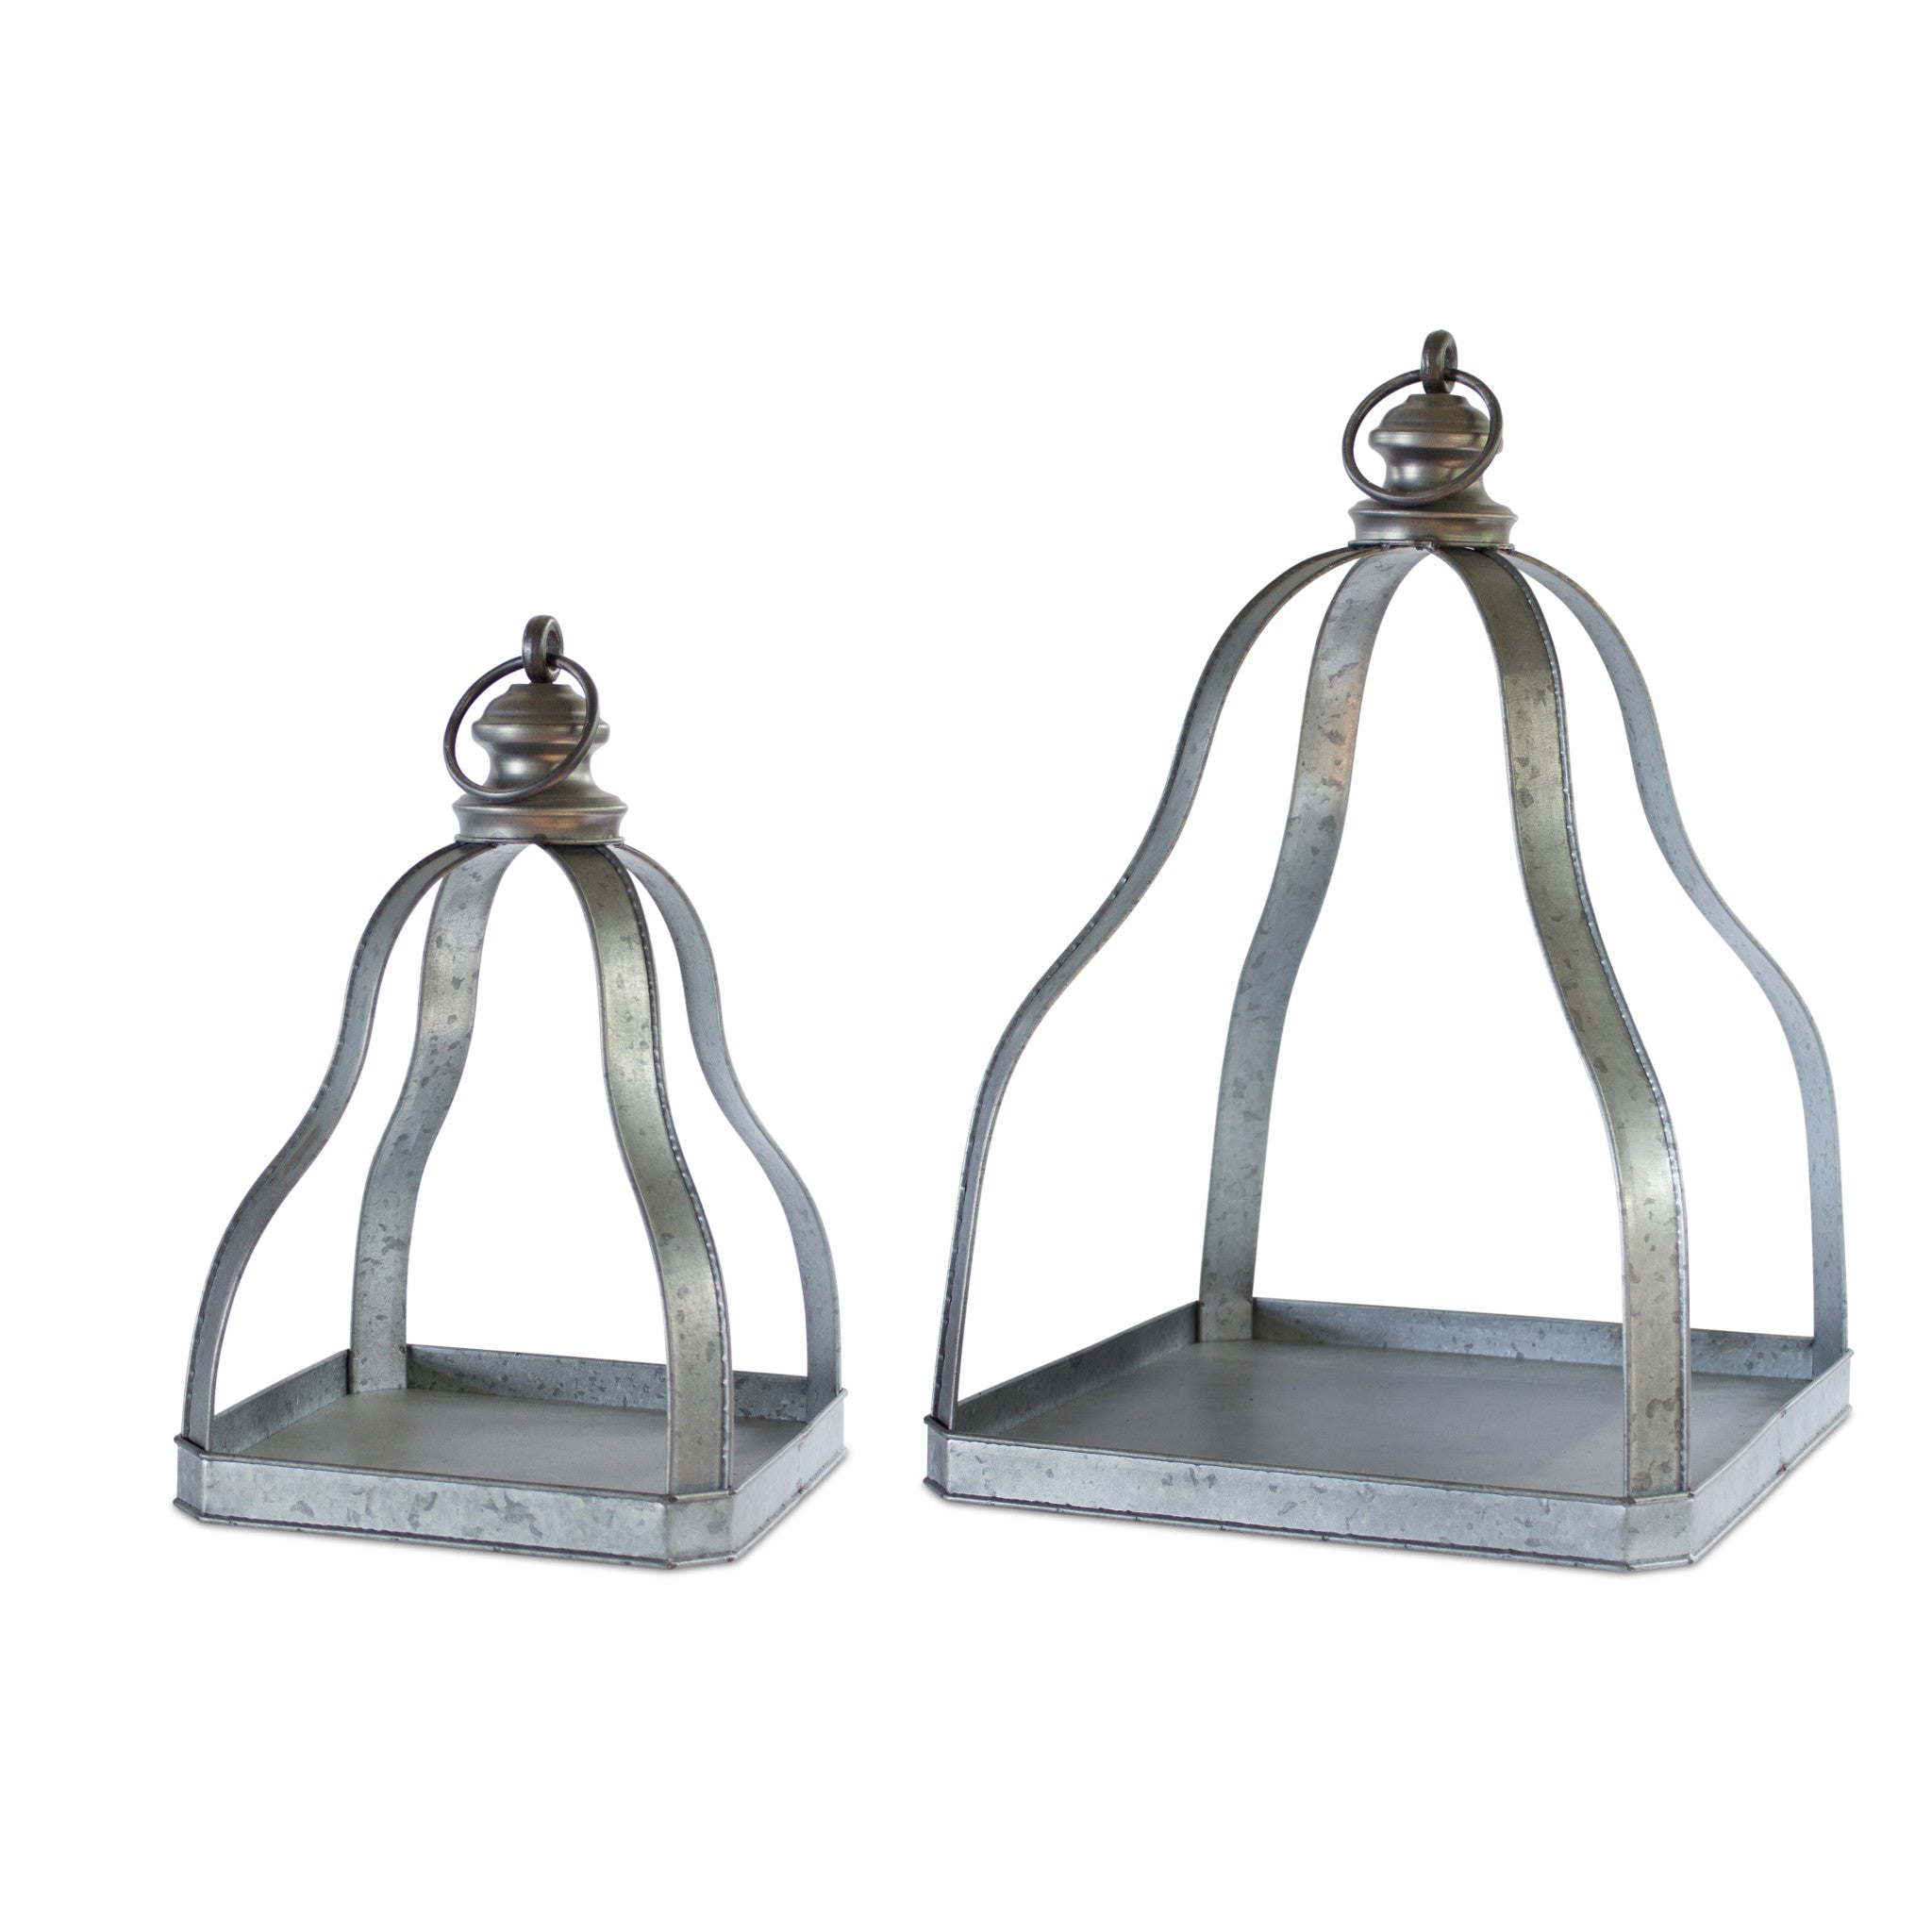 Set-Of-Two-Gray-Flameless-Floor-Lantern-Candle-Holder-Candle-Holders